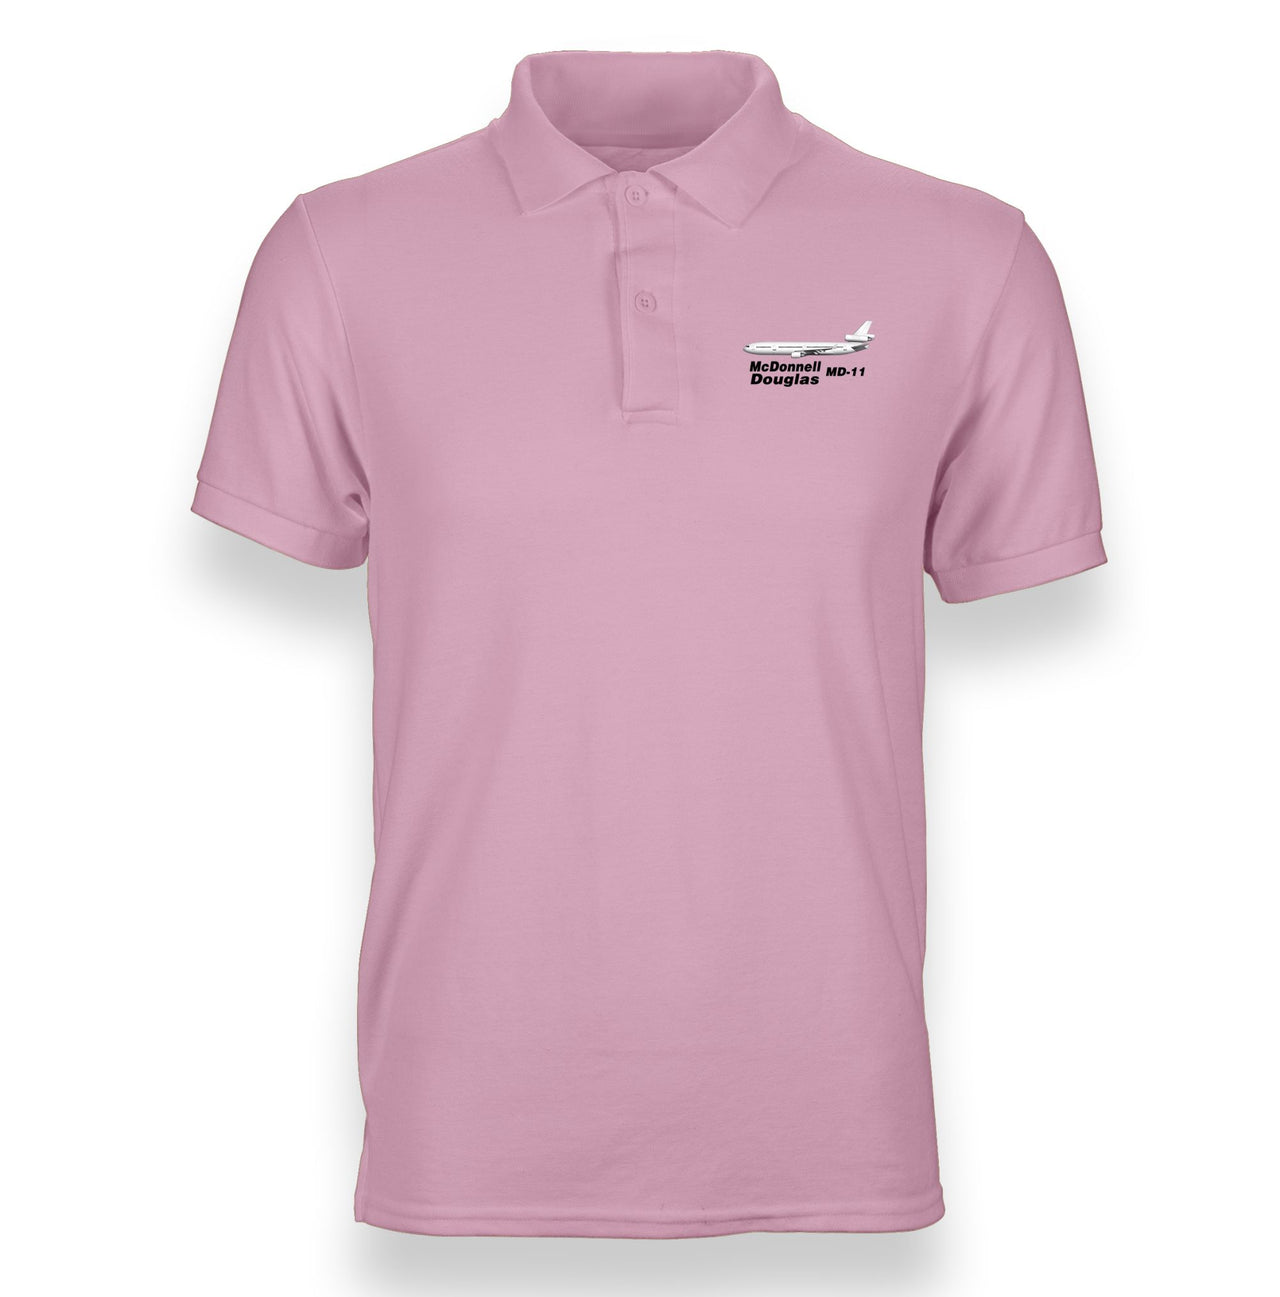 The McDonnell Douglas MD-11 Designed "WOMEN" Polo T-Shirts